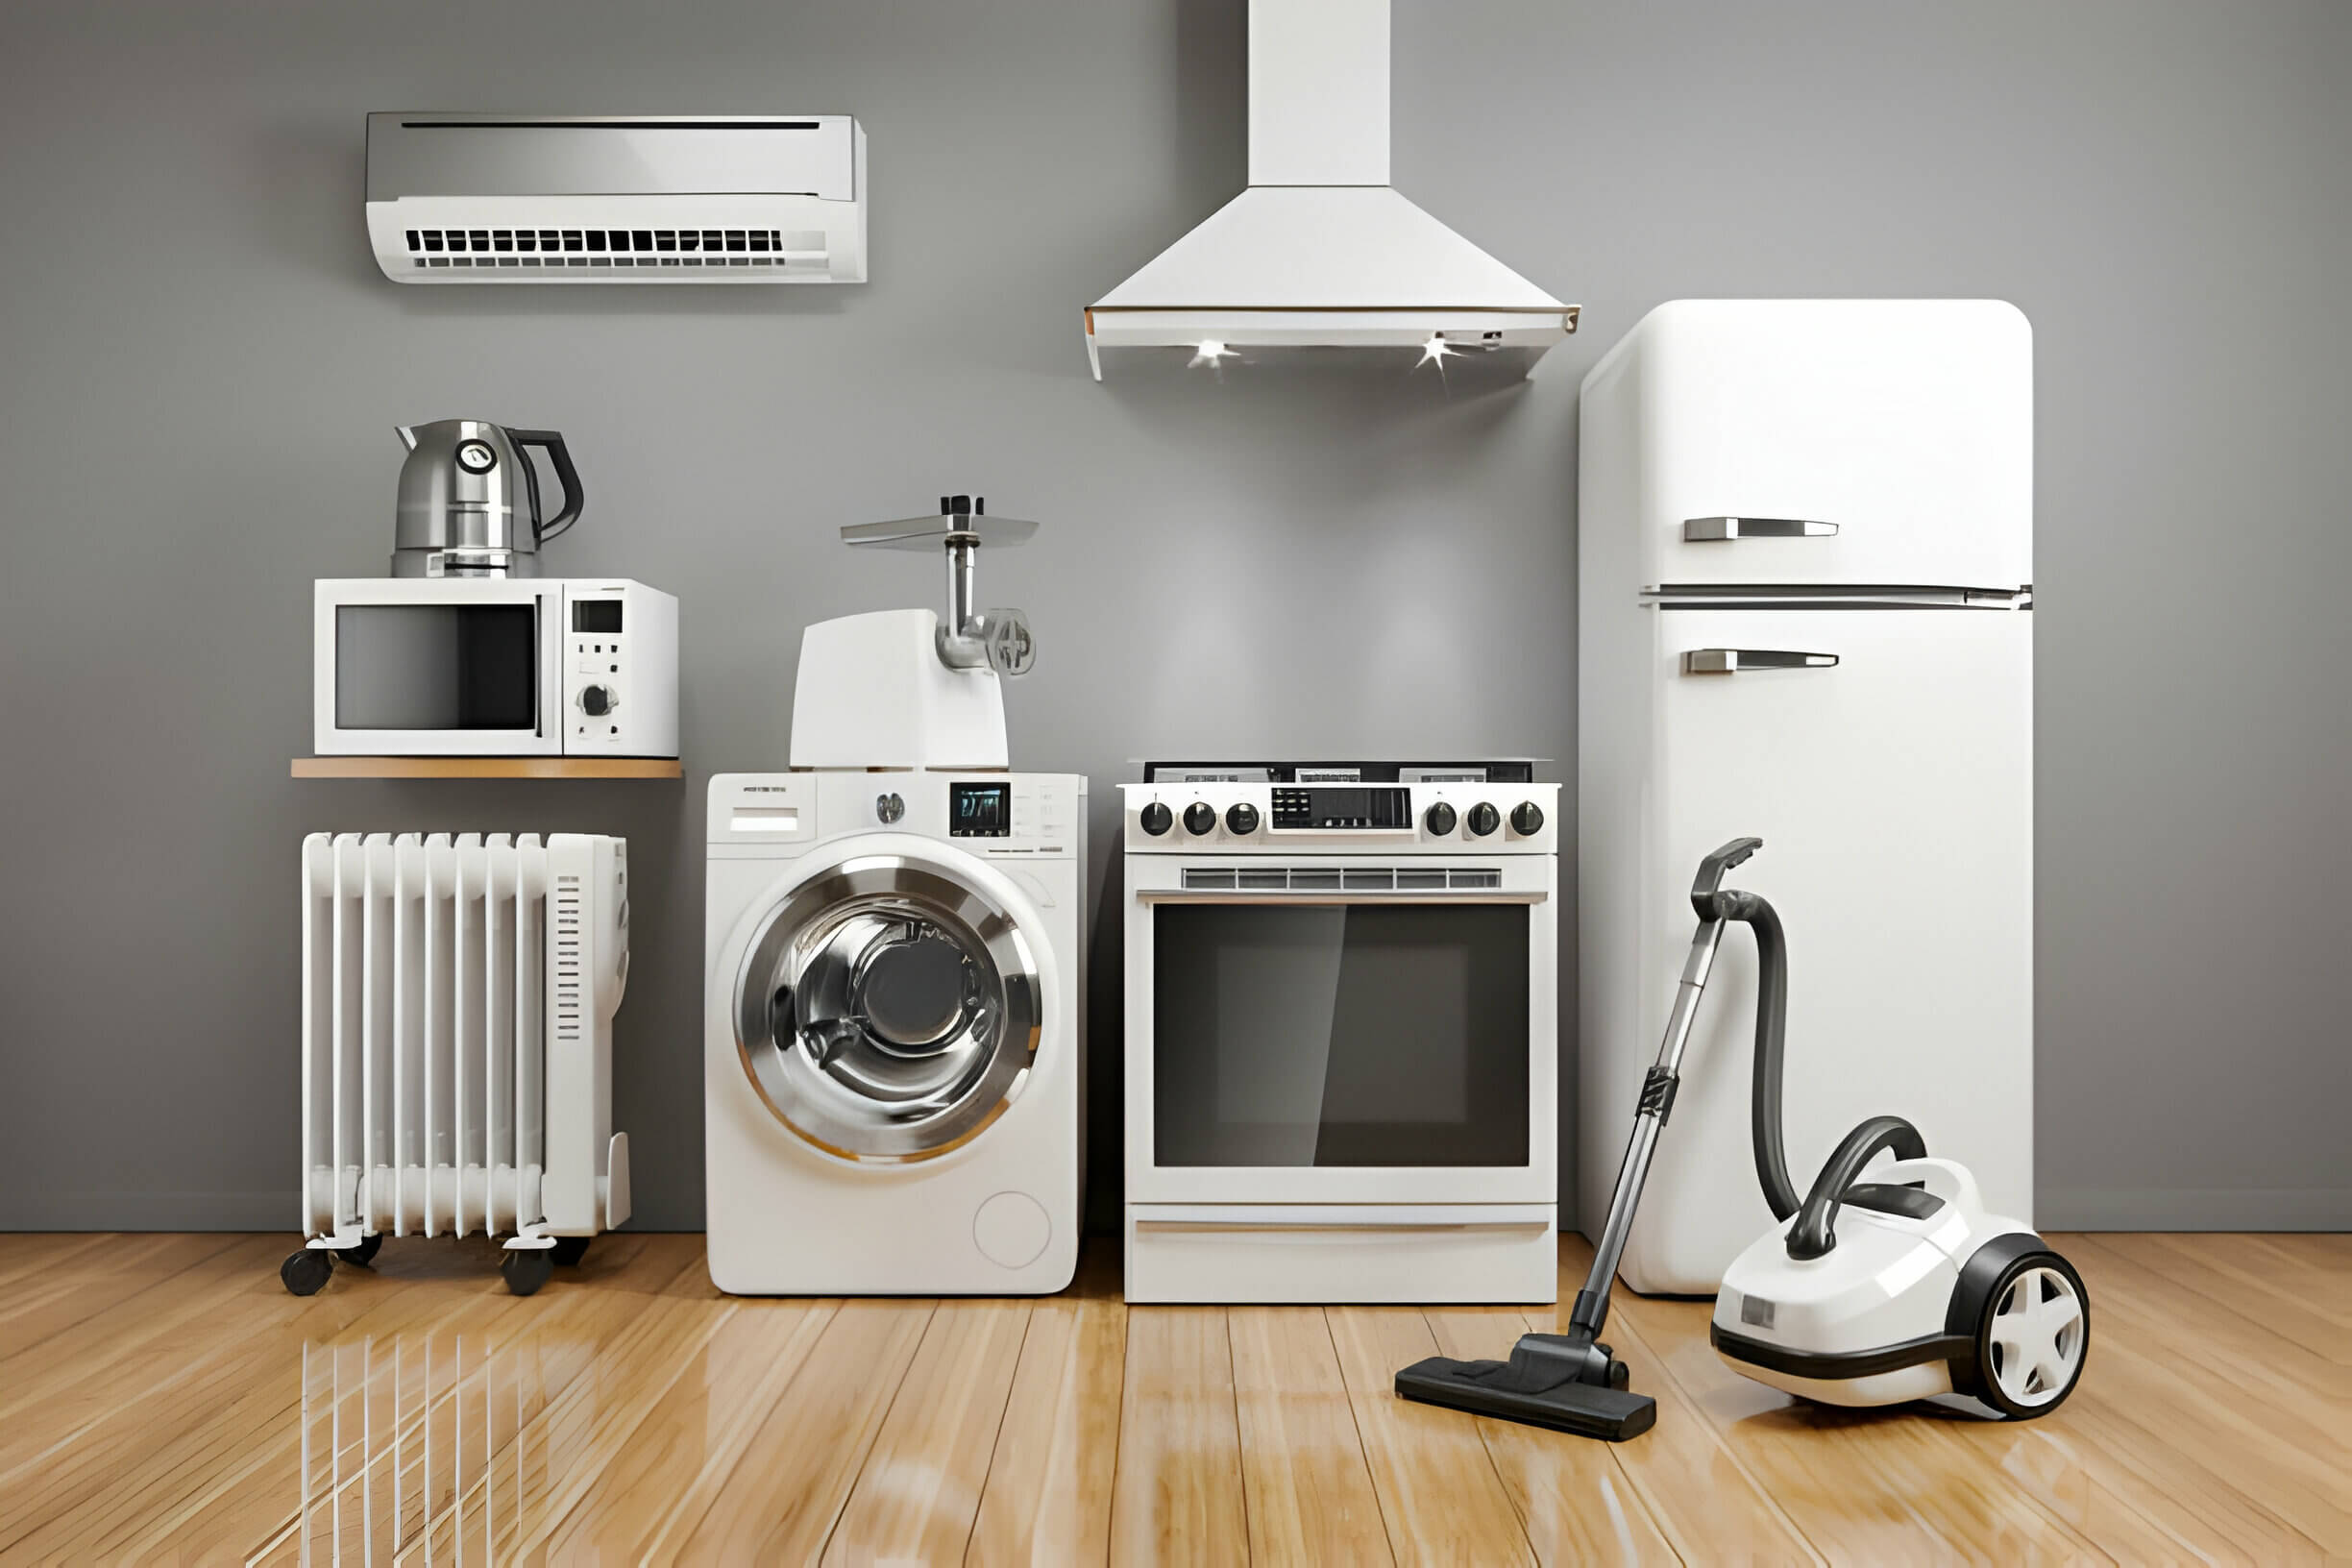 Instalation of elelctic appliances in kitchen